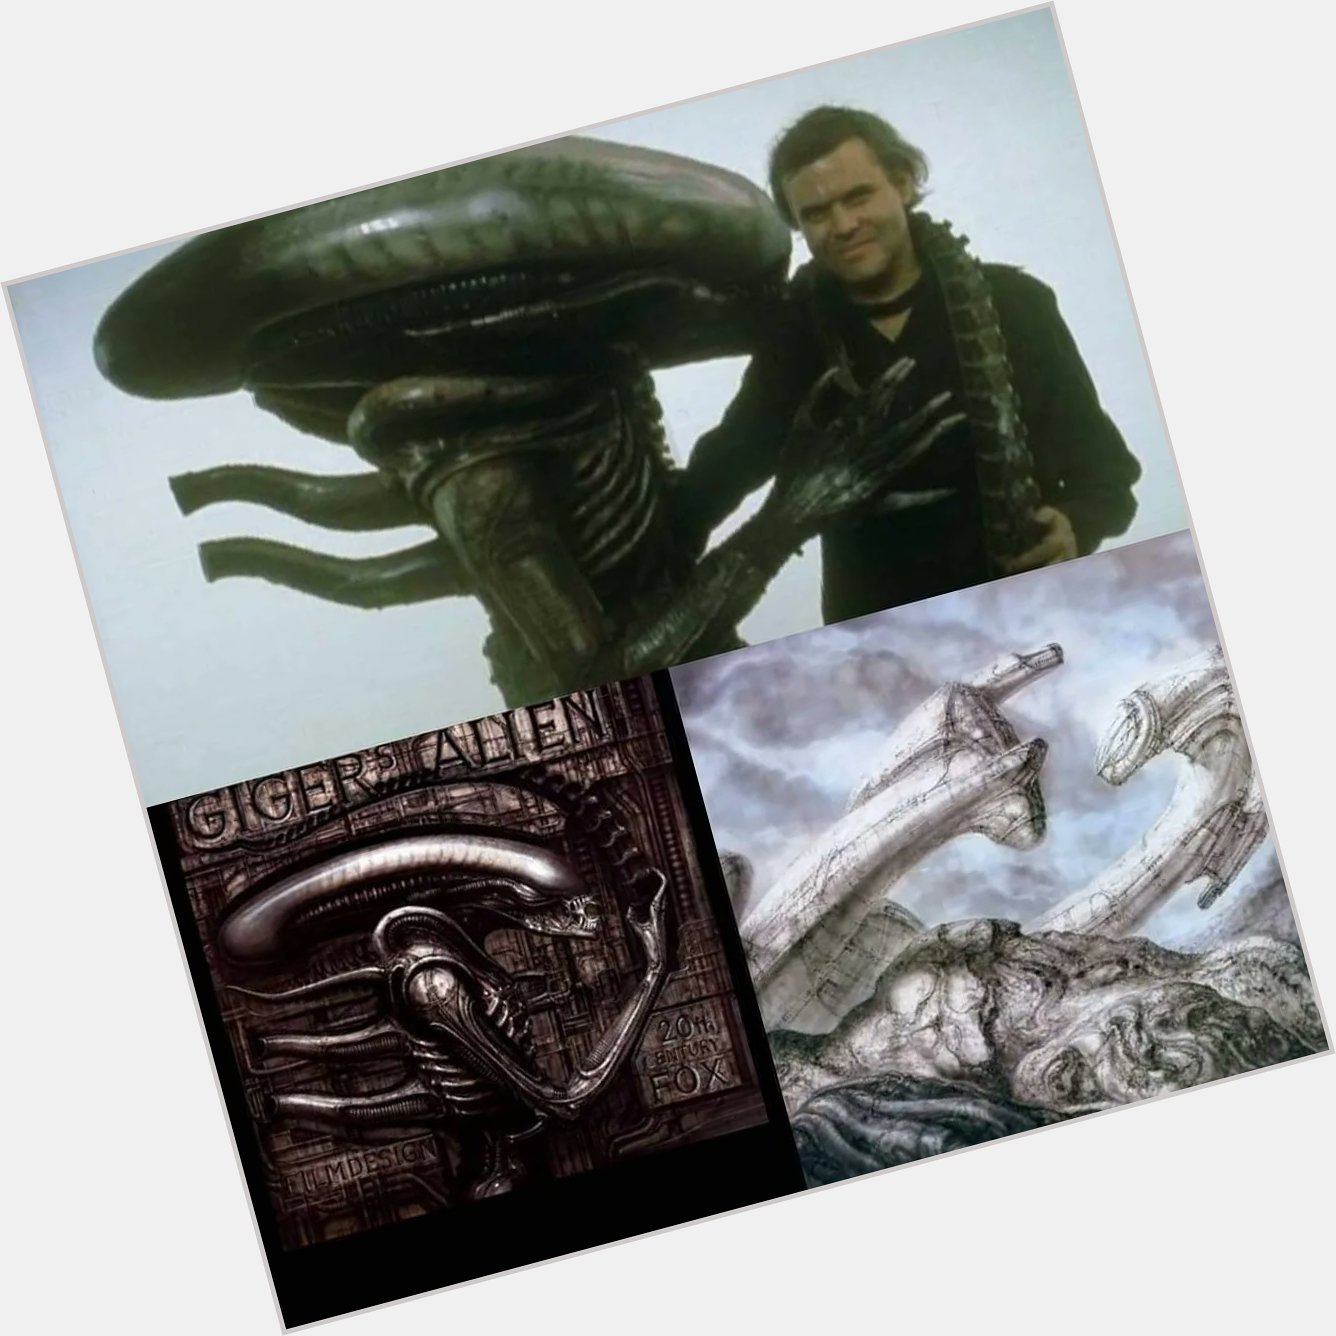 Happy birthday to the late
H.R. Giger.
RIP  